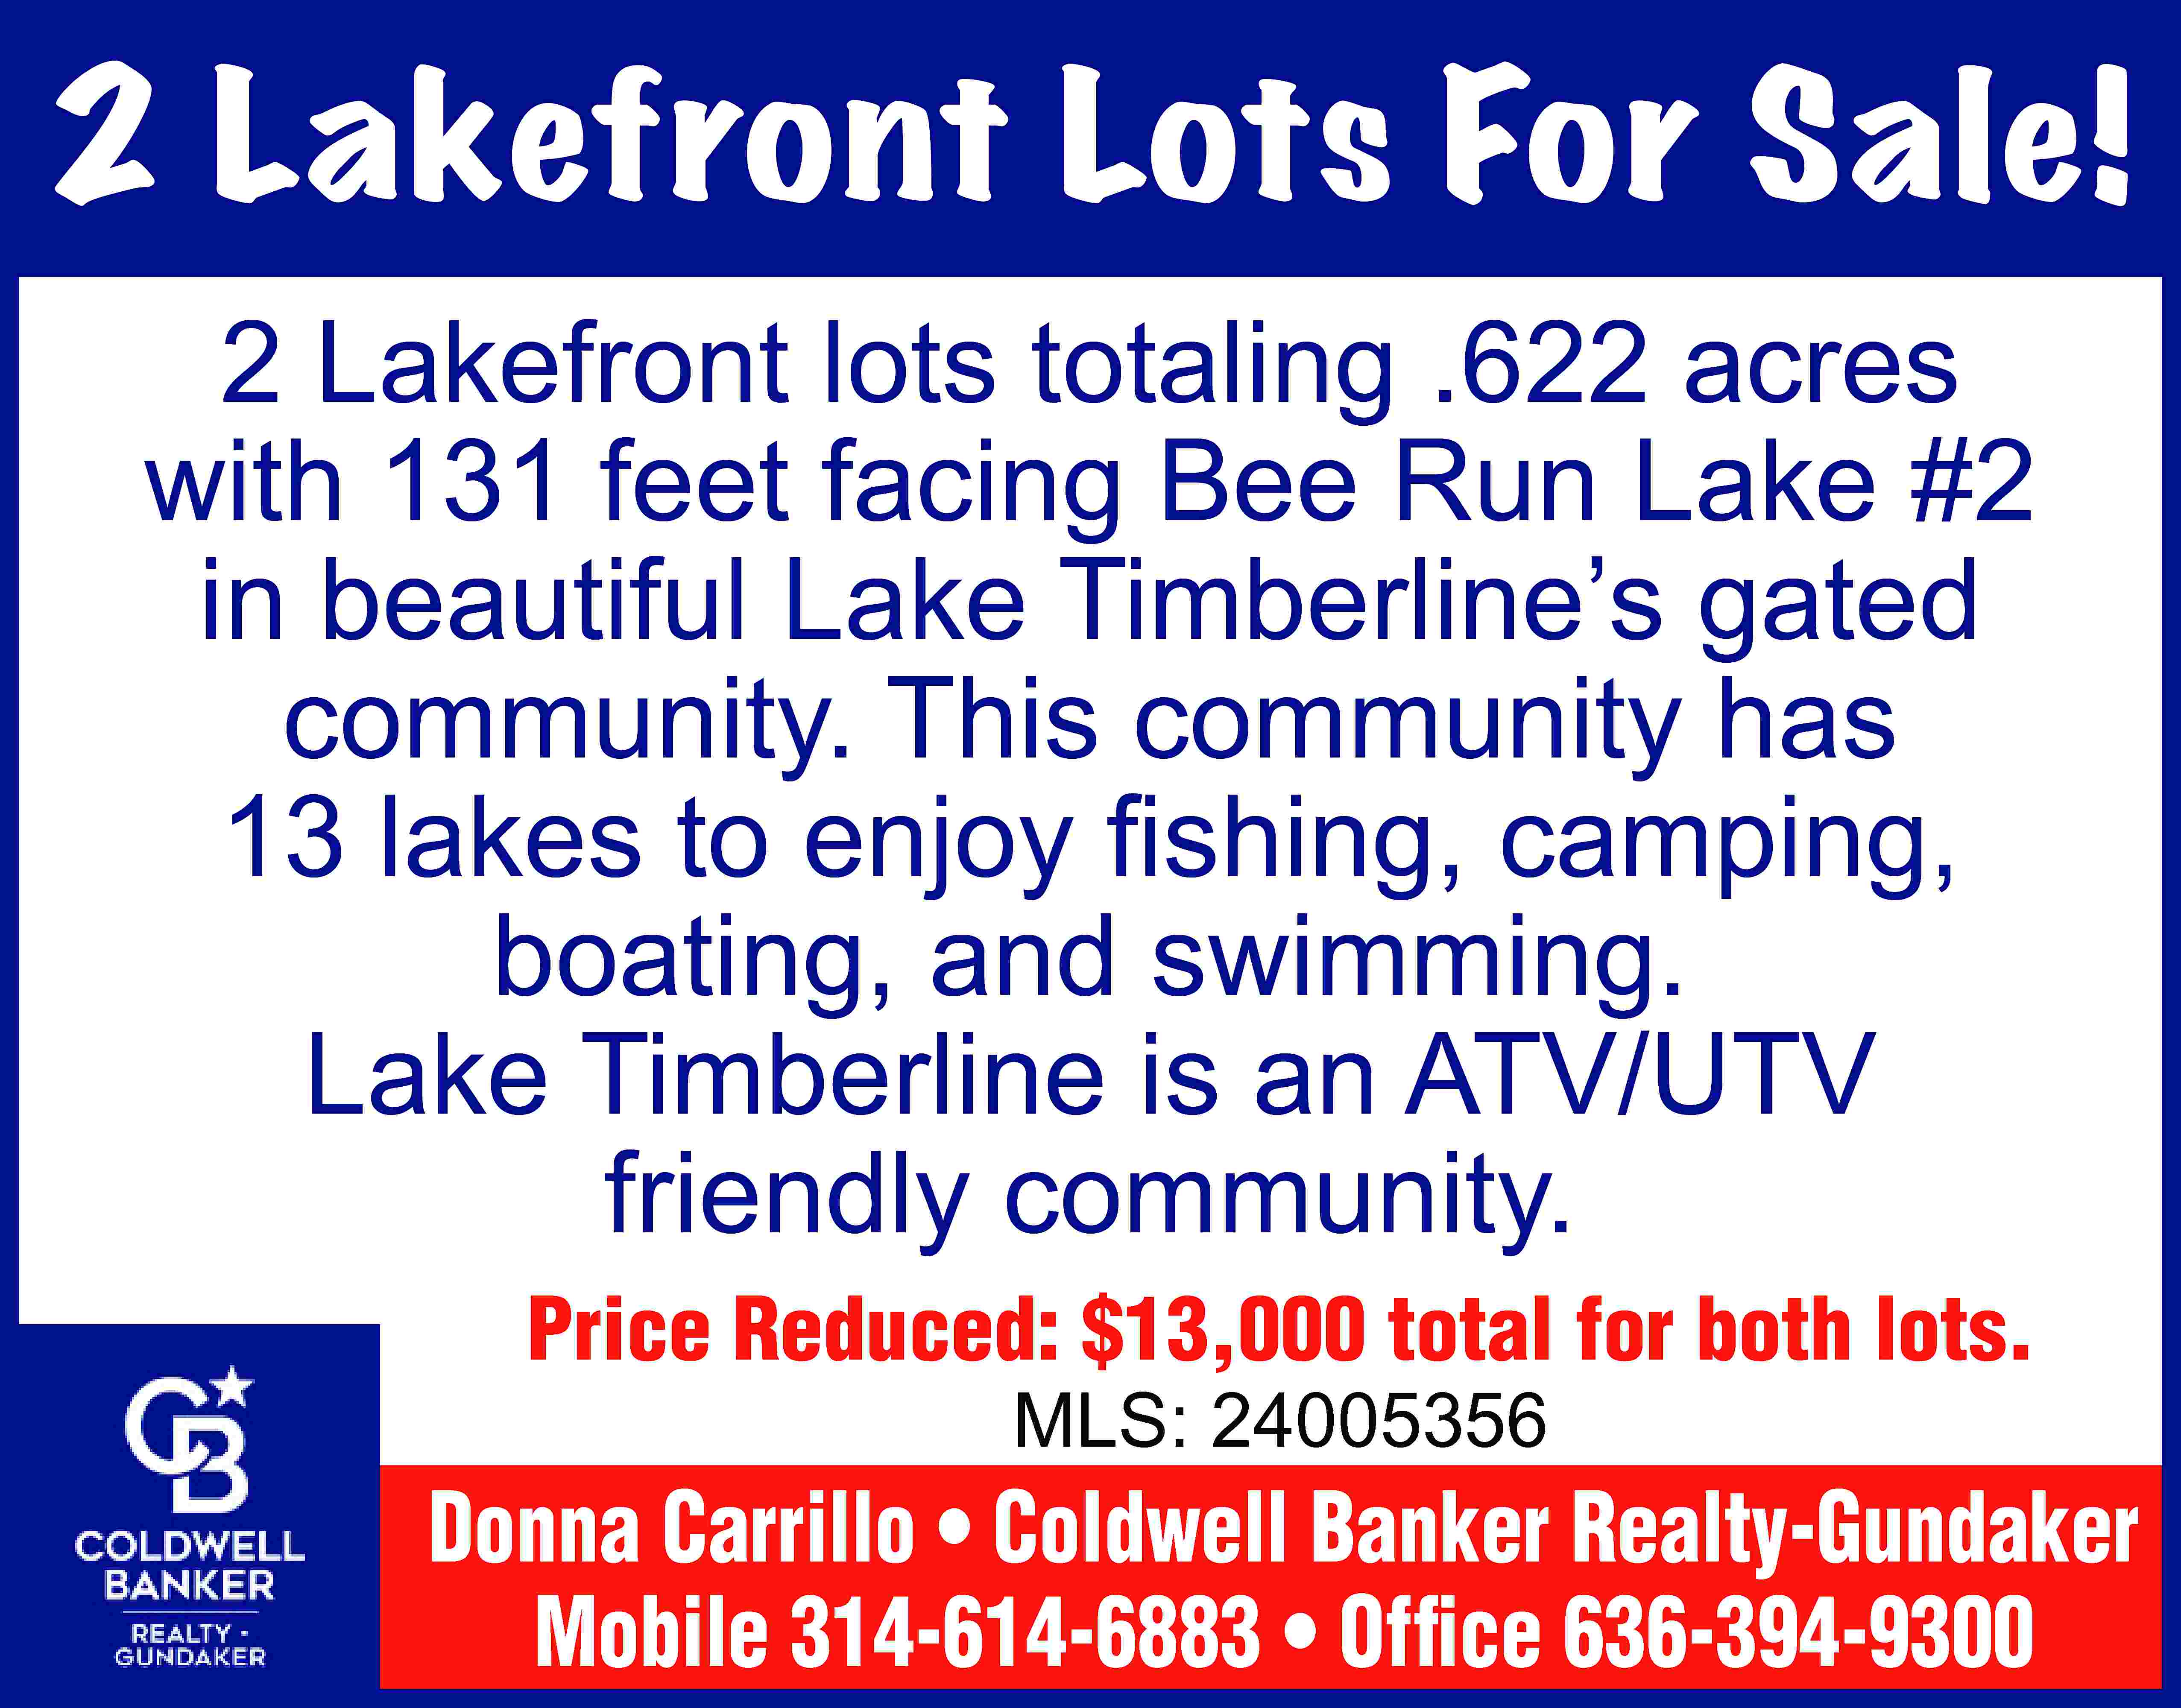 2 Lakefront Lots For Sale!  2 Lakefront Lots For Sale! 2 Lakefront lots totaling .622 acres with 131 feet facing Bee Run Lake #2 in beautiful Lake Timberline’s gated community. This community has 13 lakes to enjoy fishing, camping, boating, and swimming. Lake Timberline is an ATV/UTV friendly community. Price Reduced: $13,000 total for both lots. MLS: 24005356 Donna Carrillo • Coldwell Banker Realty-Gundaker Mobile 314-614-6883 • Office 636-394-9300